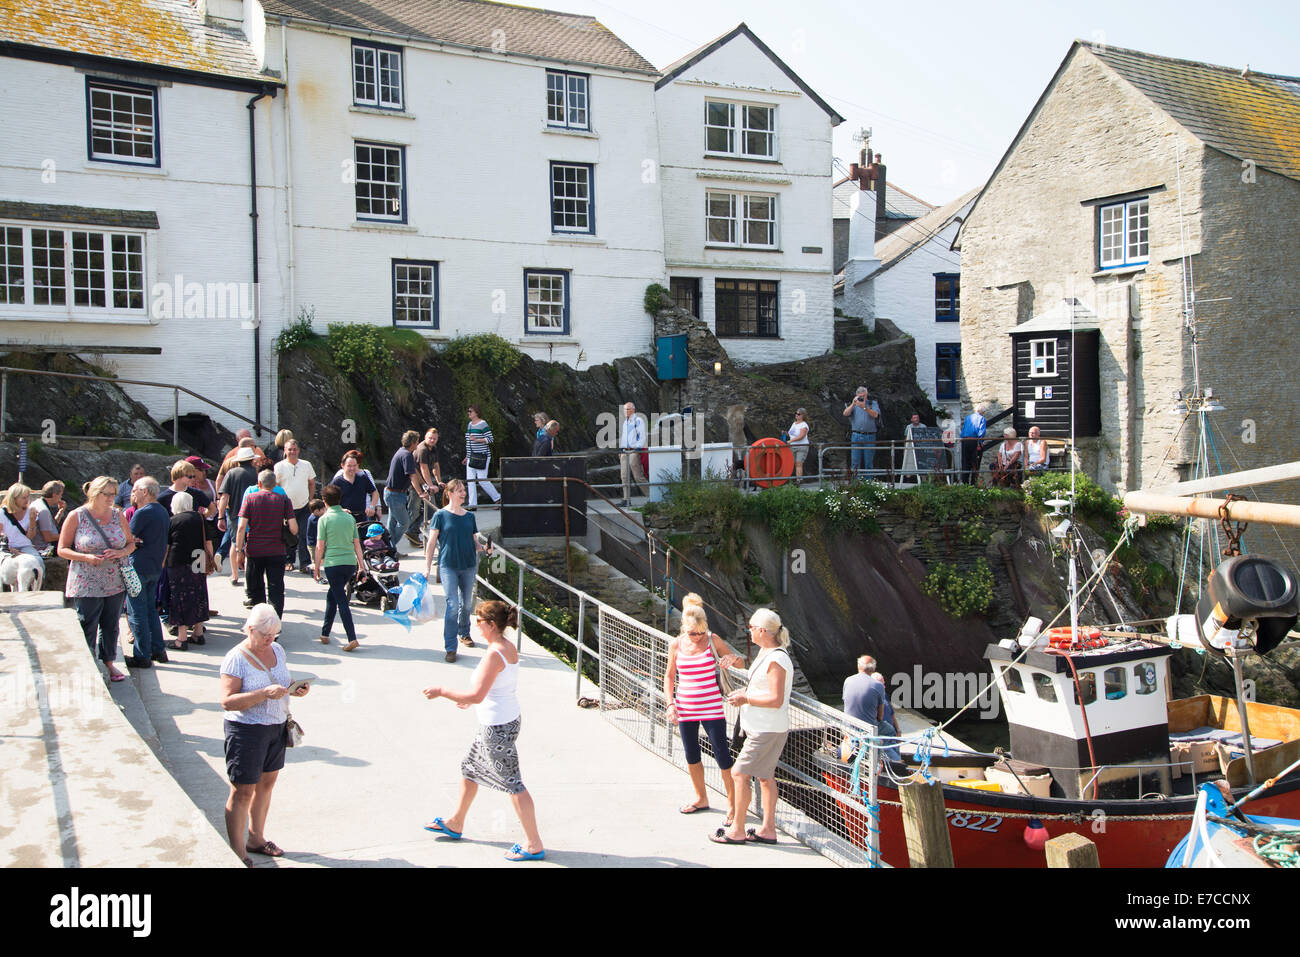 Holiday makers enjoying the sunshine on the quayside in the fishing village of Polperro, Cornwall, England Stock Photo